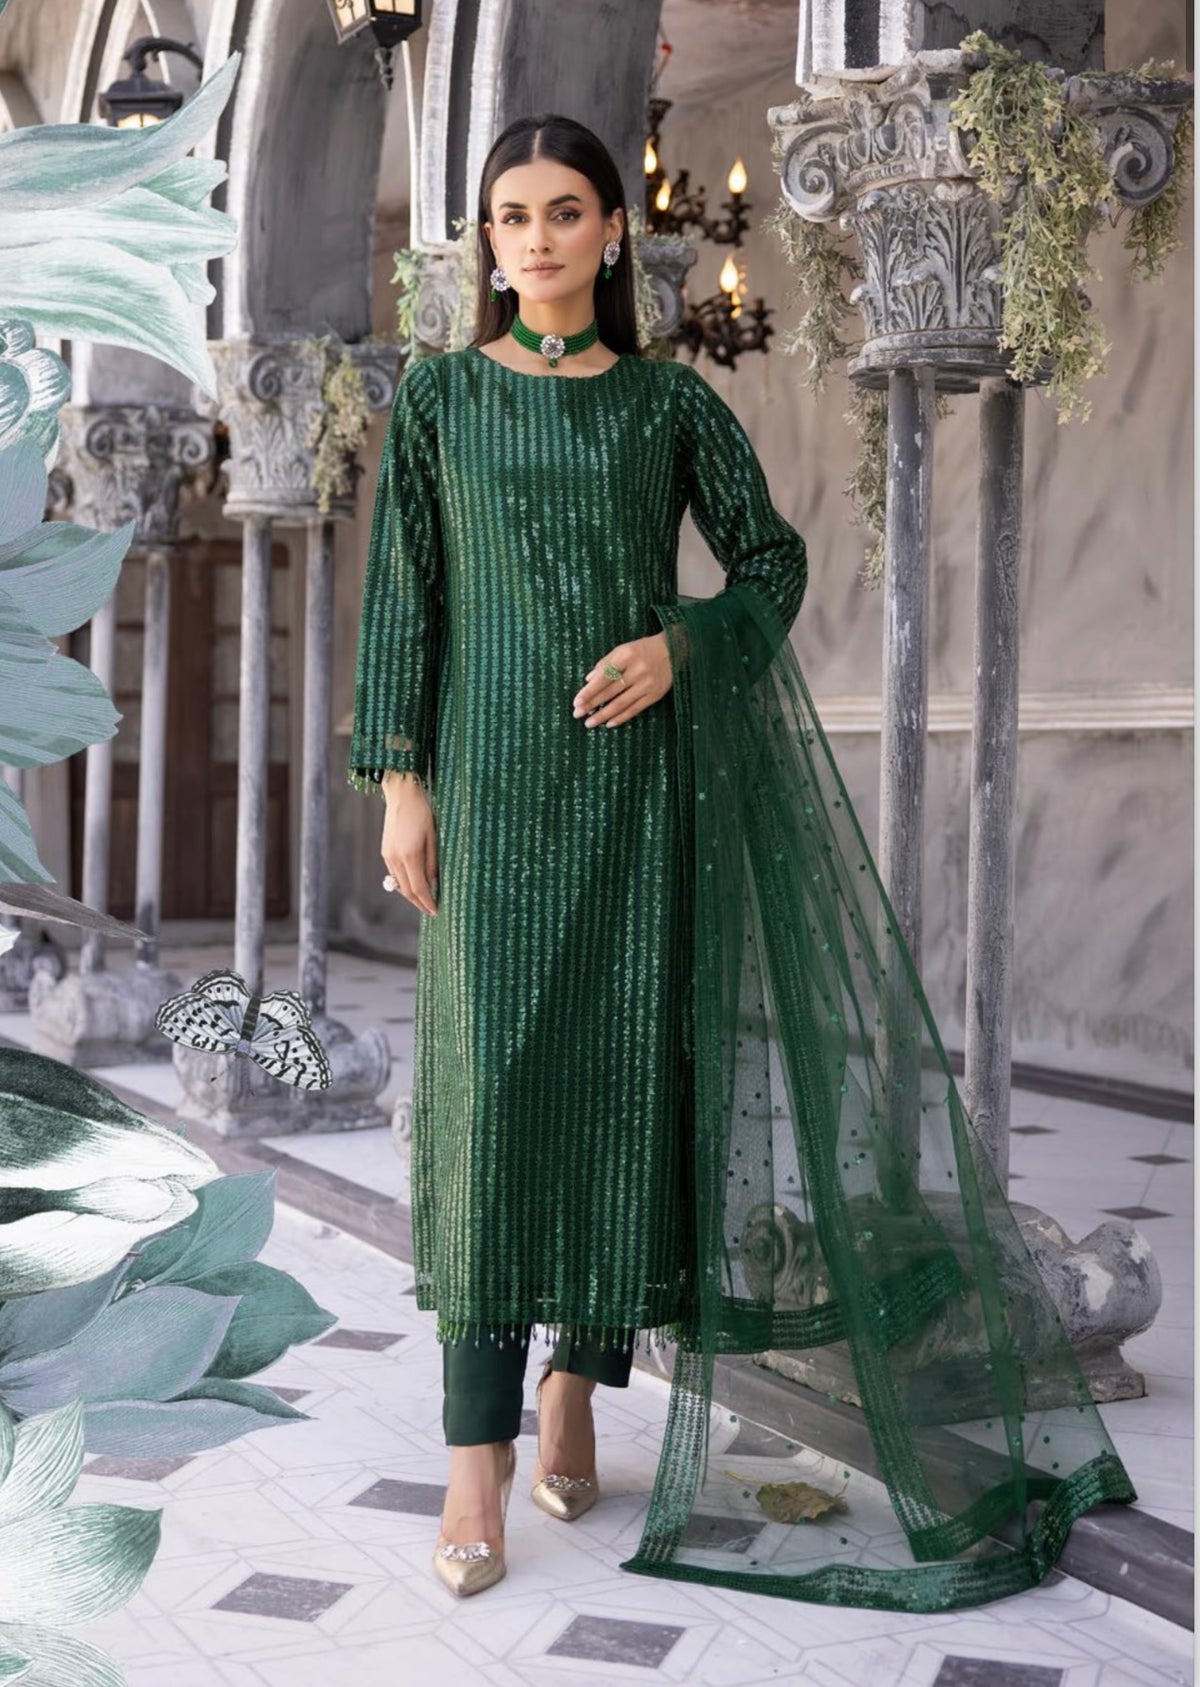 SIMRANS Baroque inspired Green Designer chiffon Embroidered 3 Piece Shimmer Outfit